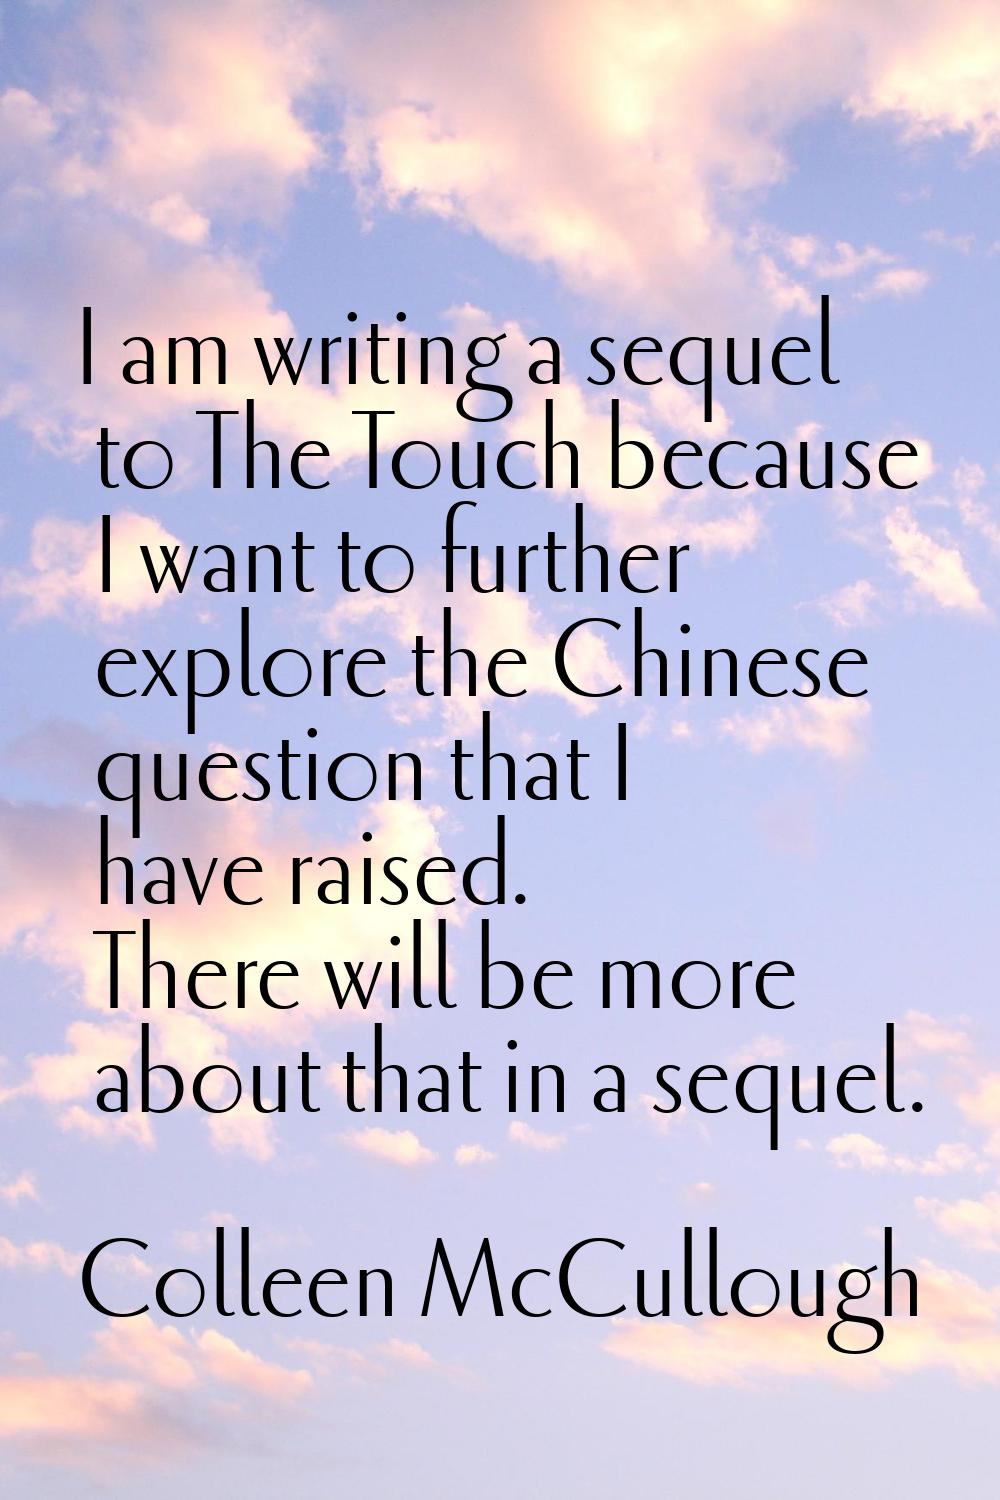 I am writing a sequel to The Touch because I want to further explore the Chinese question that I ha